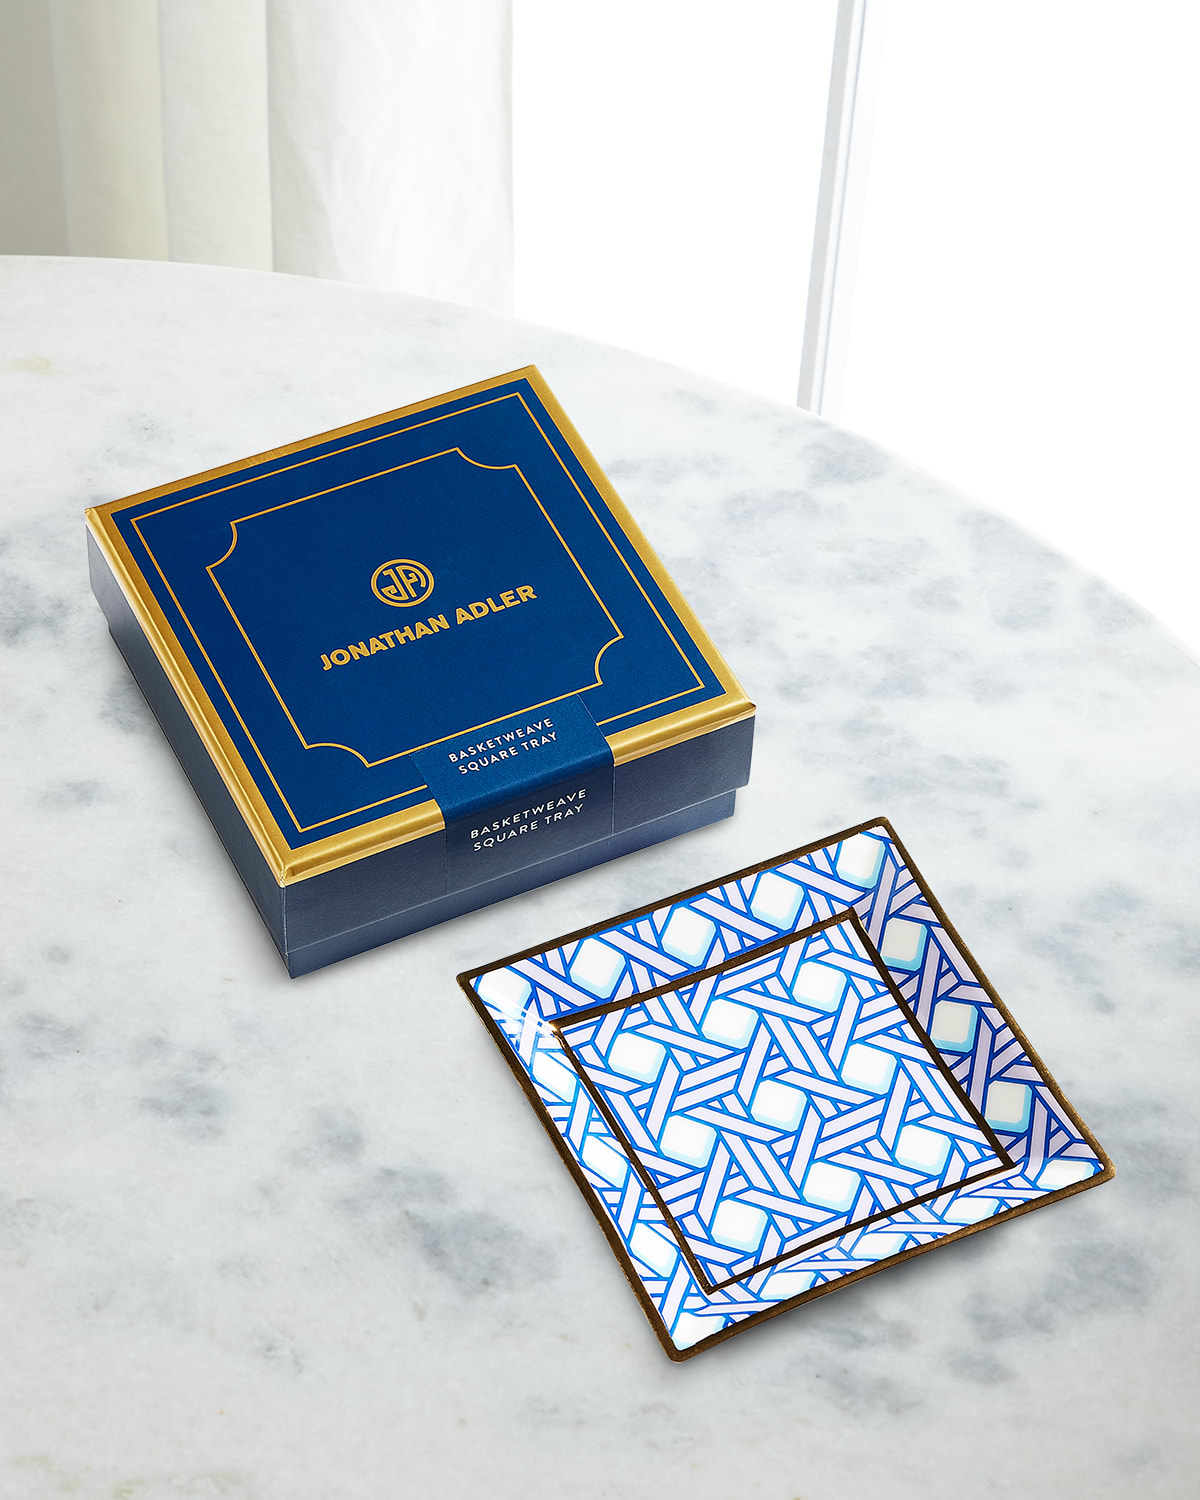 Jonathan Adler Op Art Lacquer Jewelry Box | Horchow